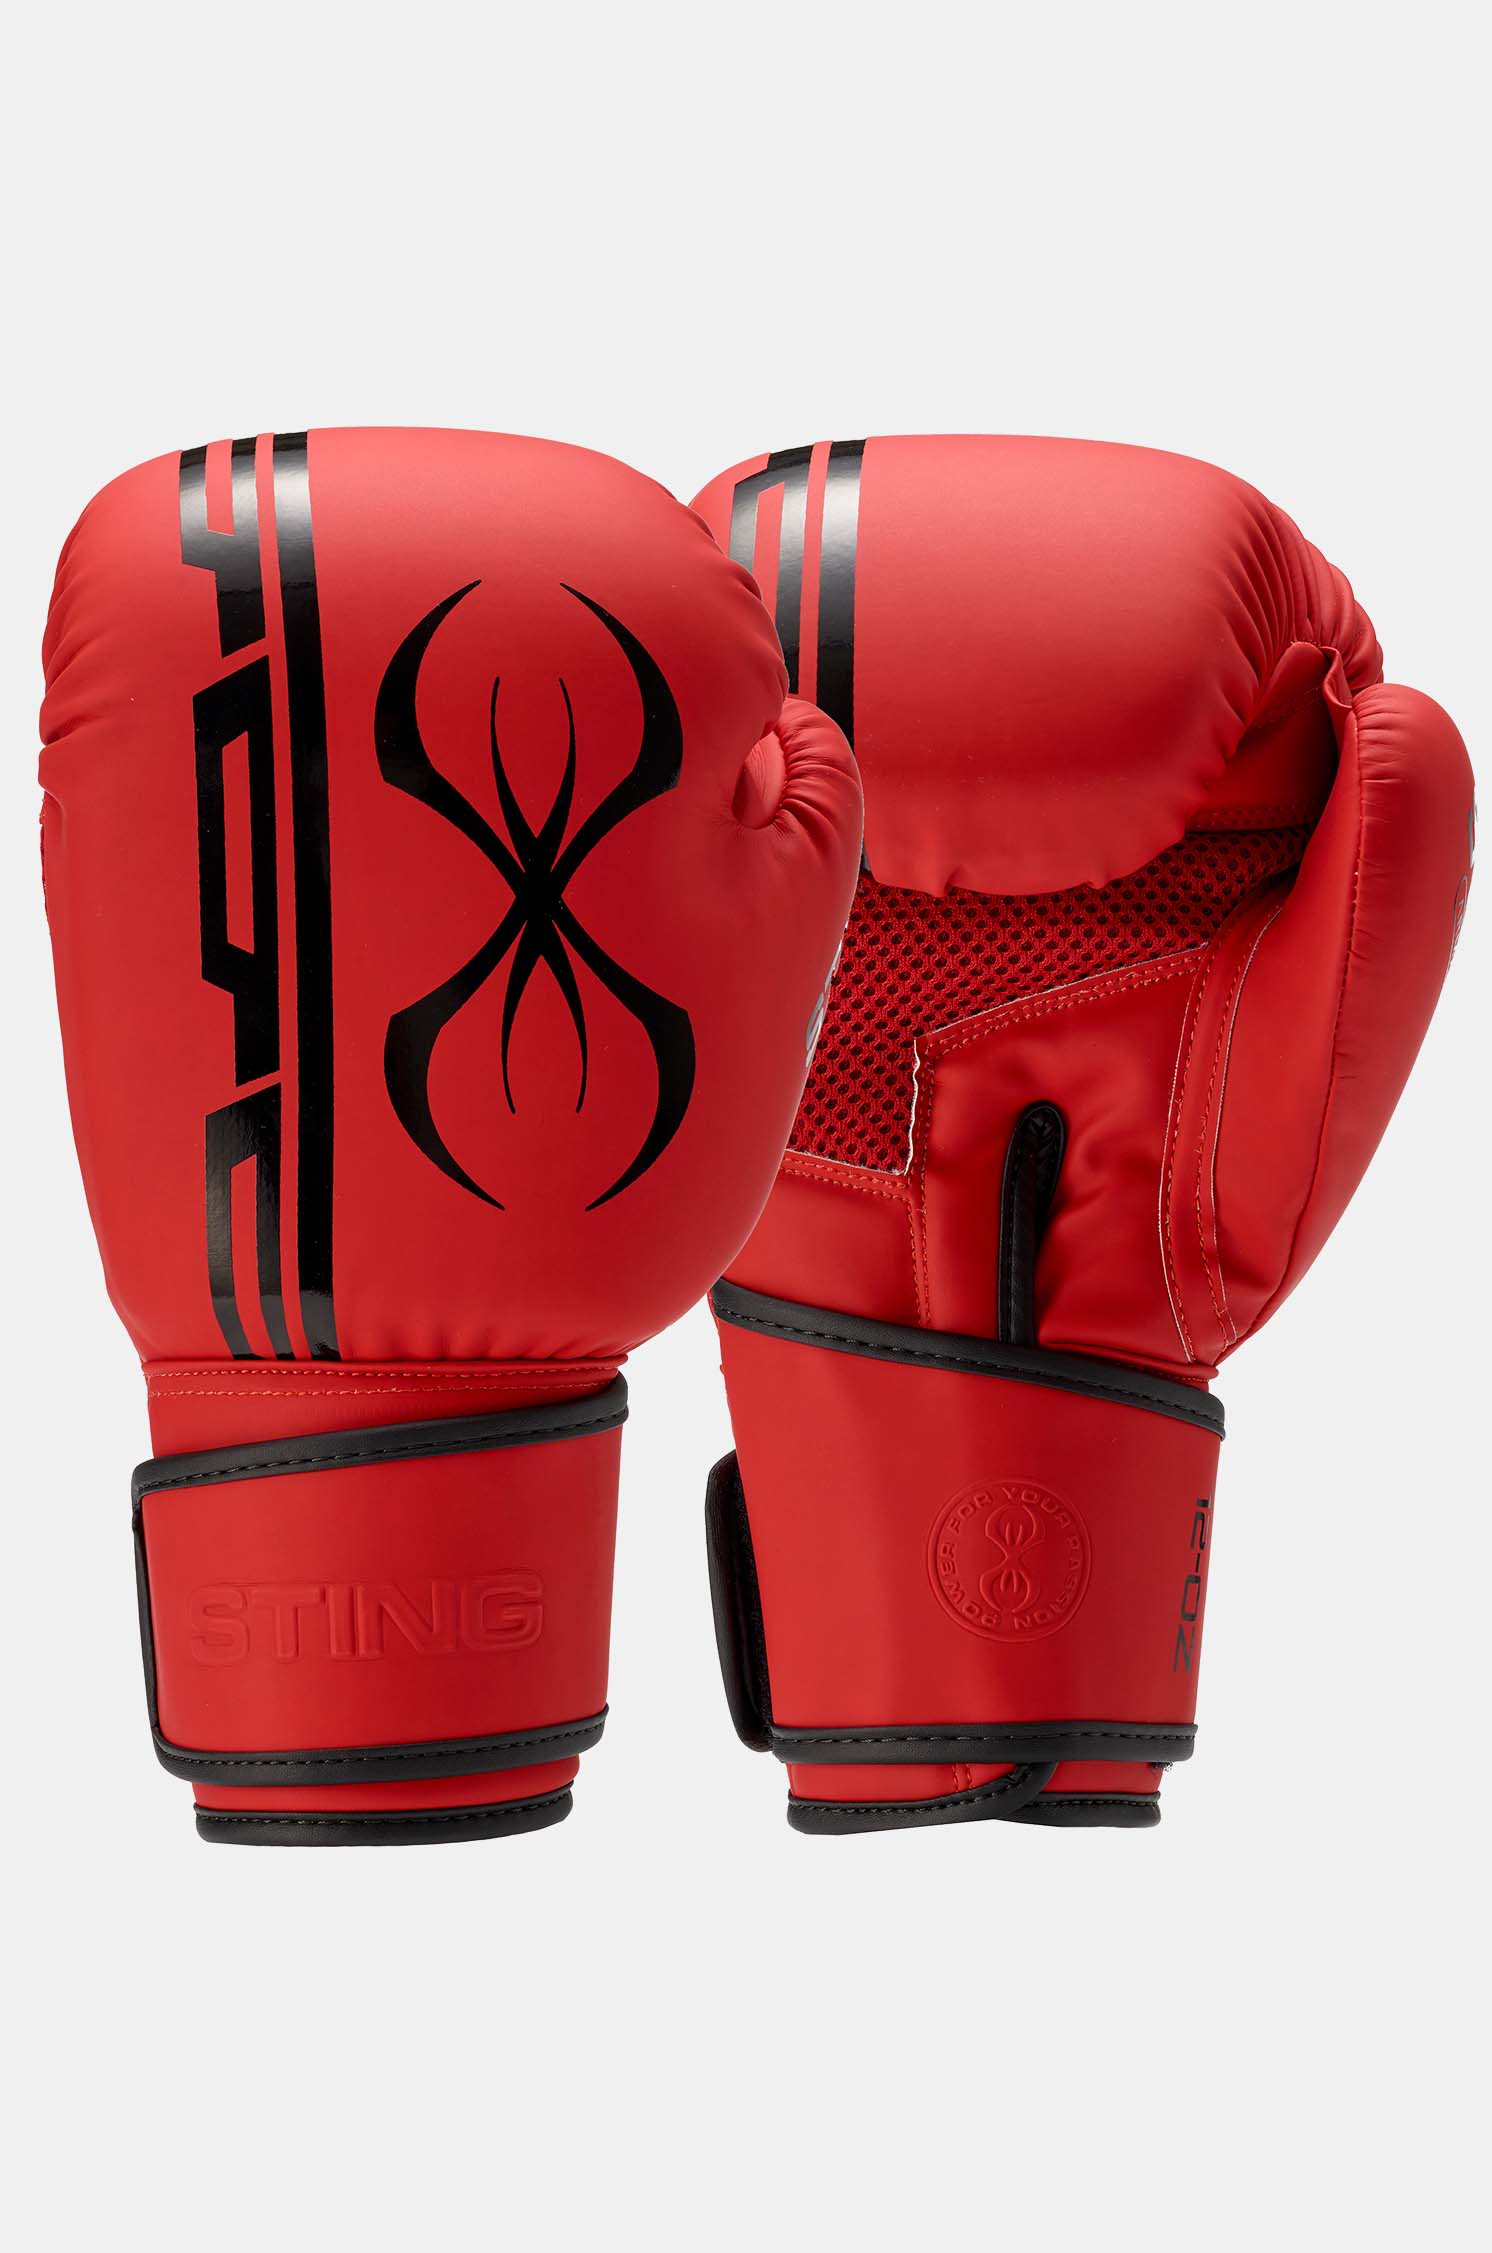 STING Armaplus Boxing Glove Red